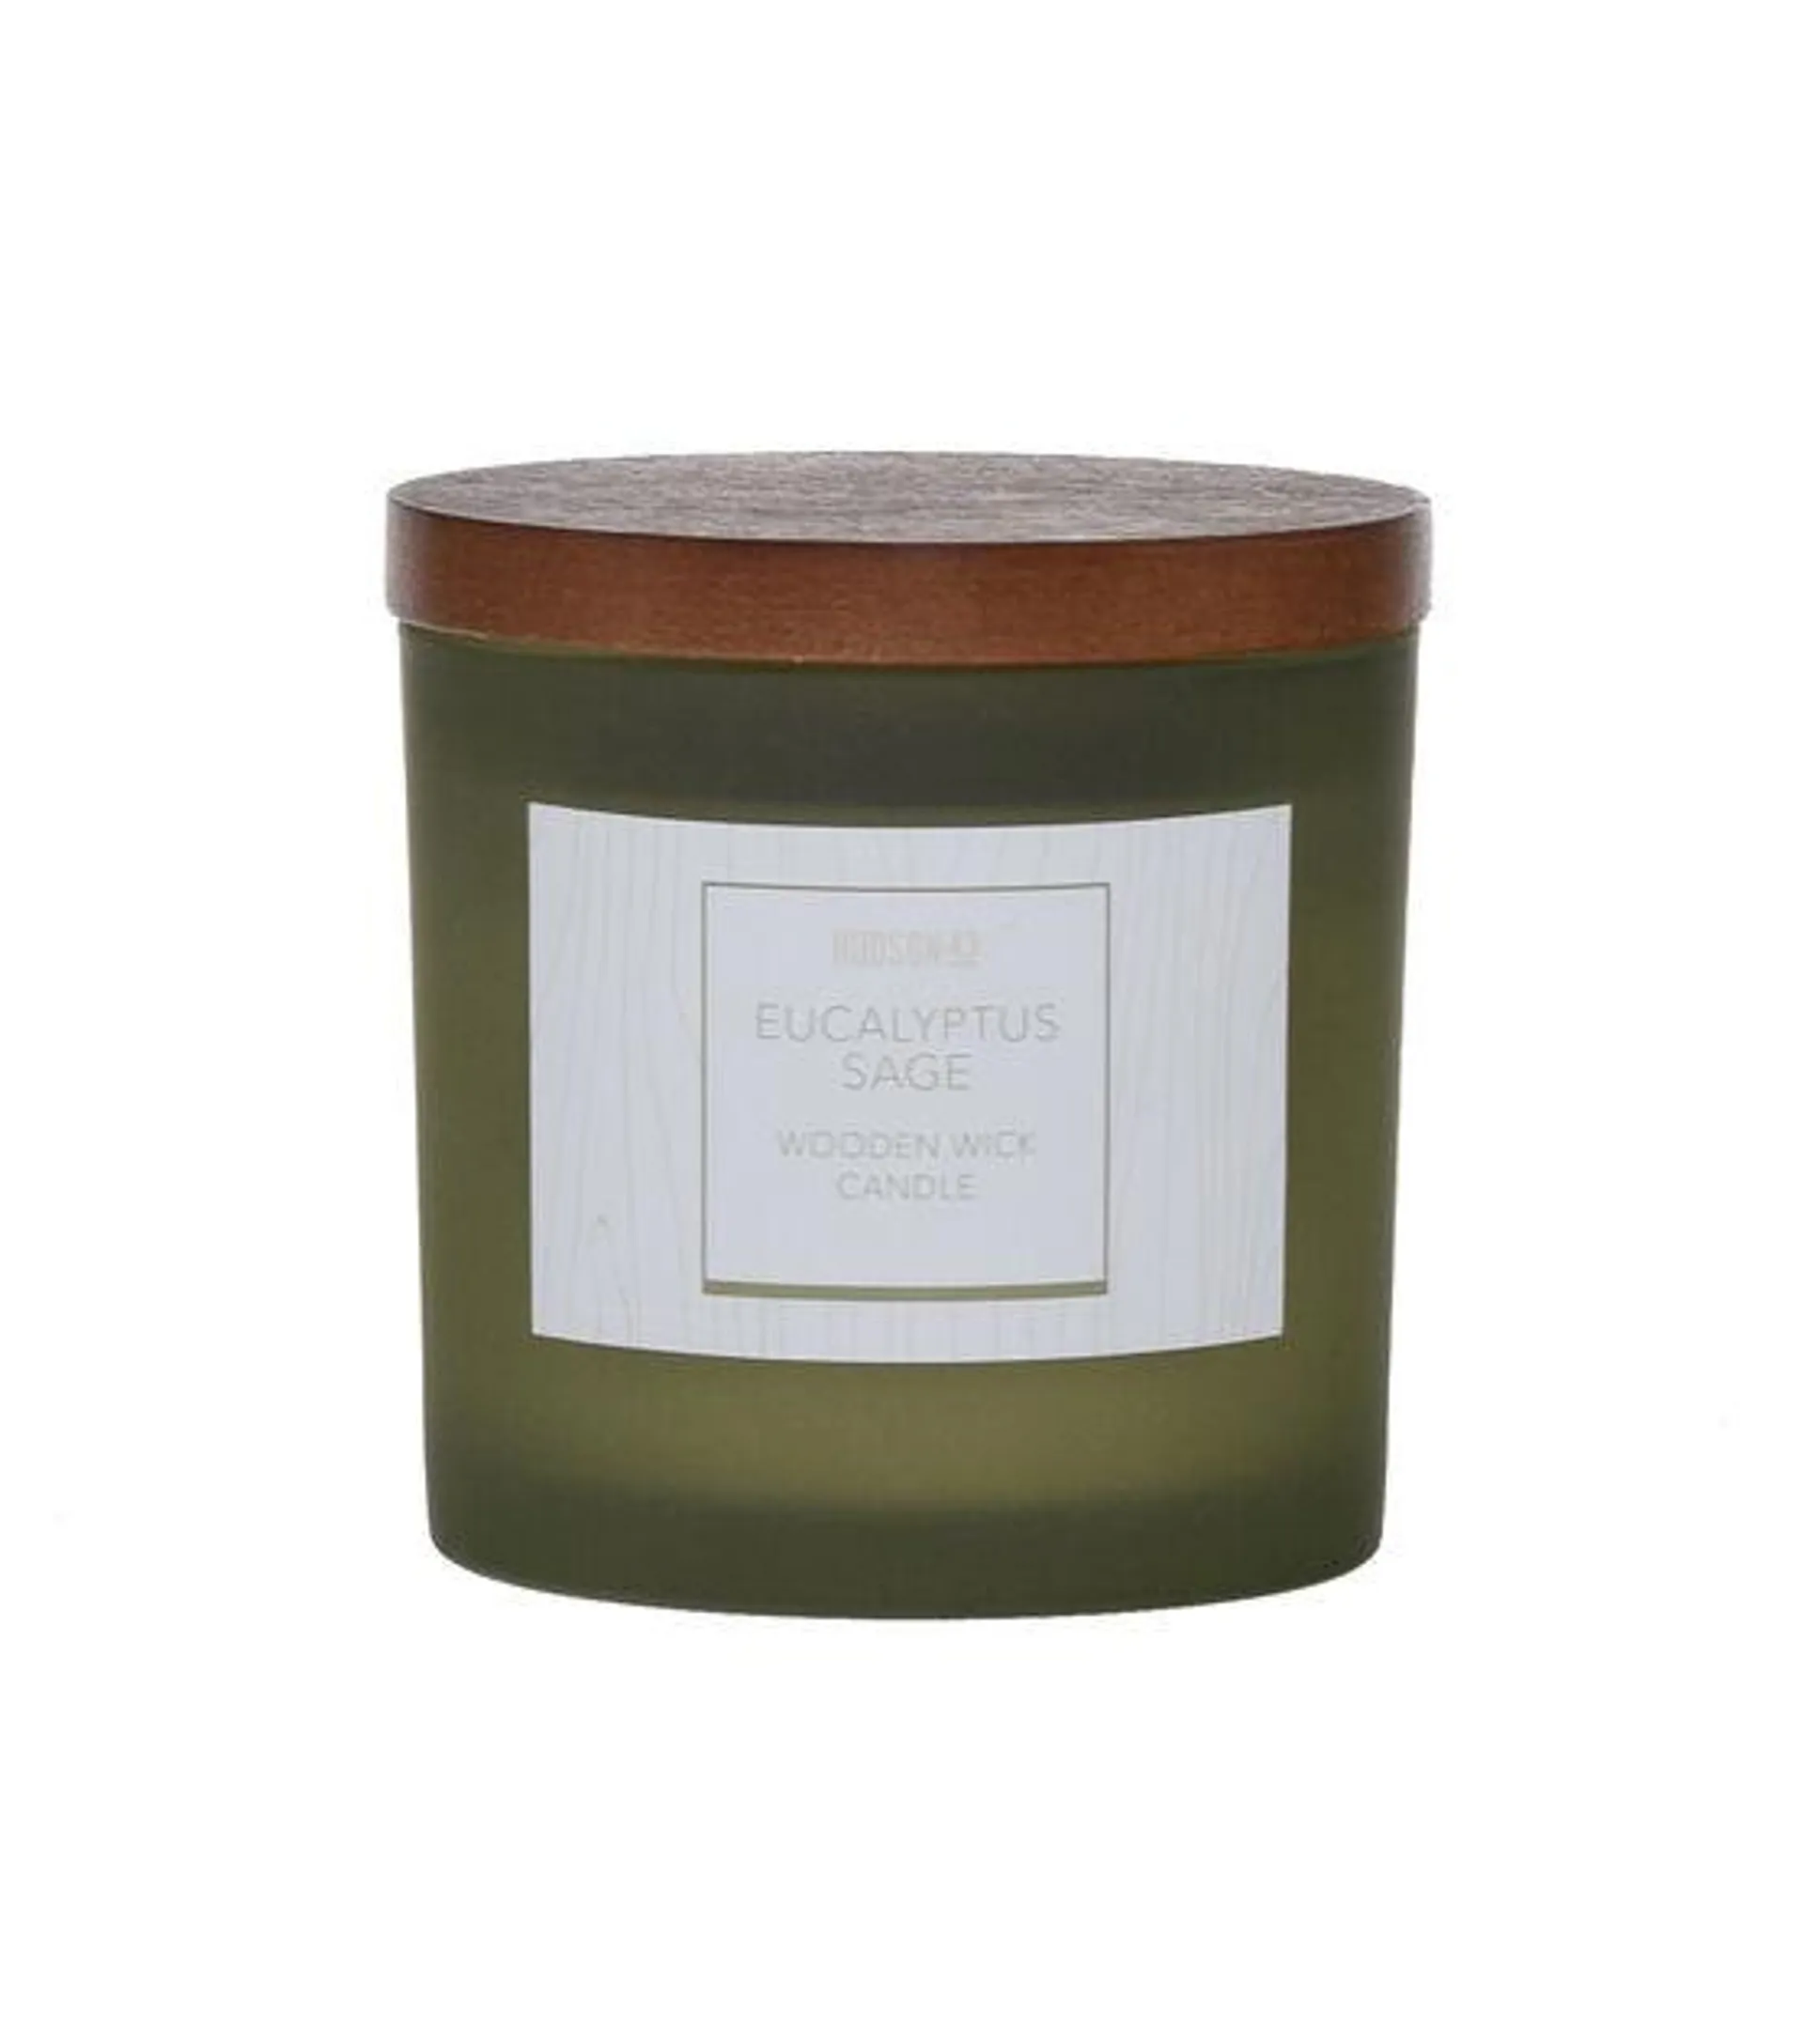 Hudson 43 Wooden Wick Frosted Candle 5oz Eucalyptus Sage Green